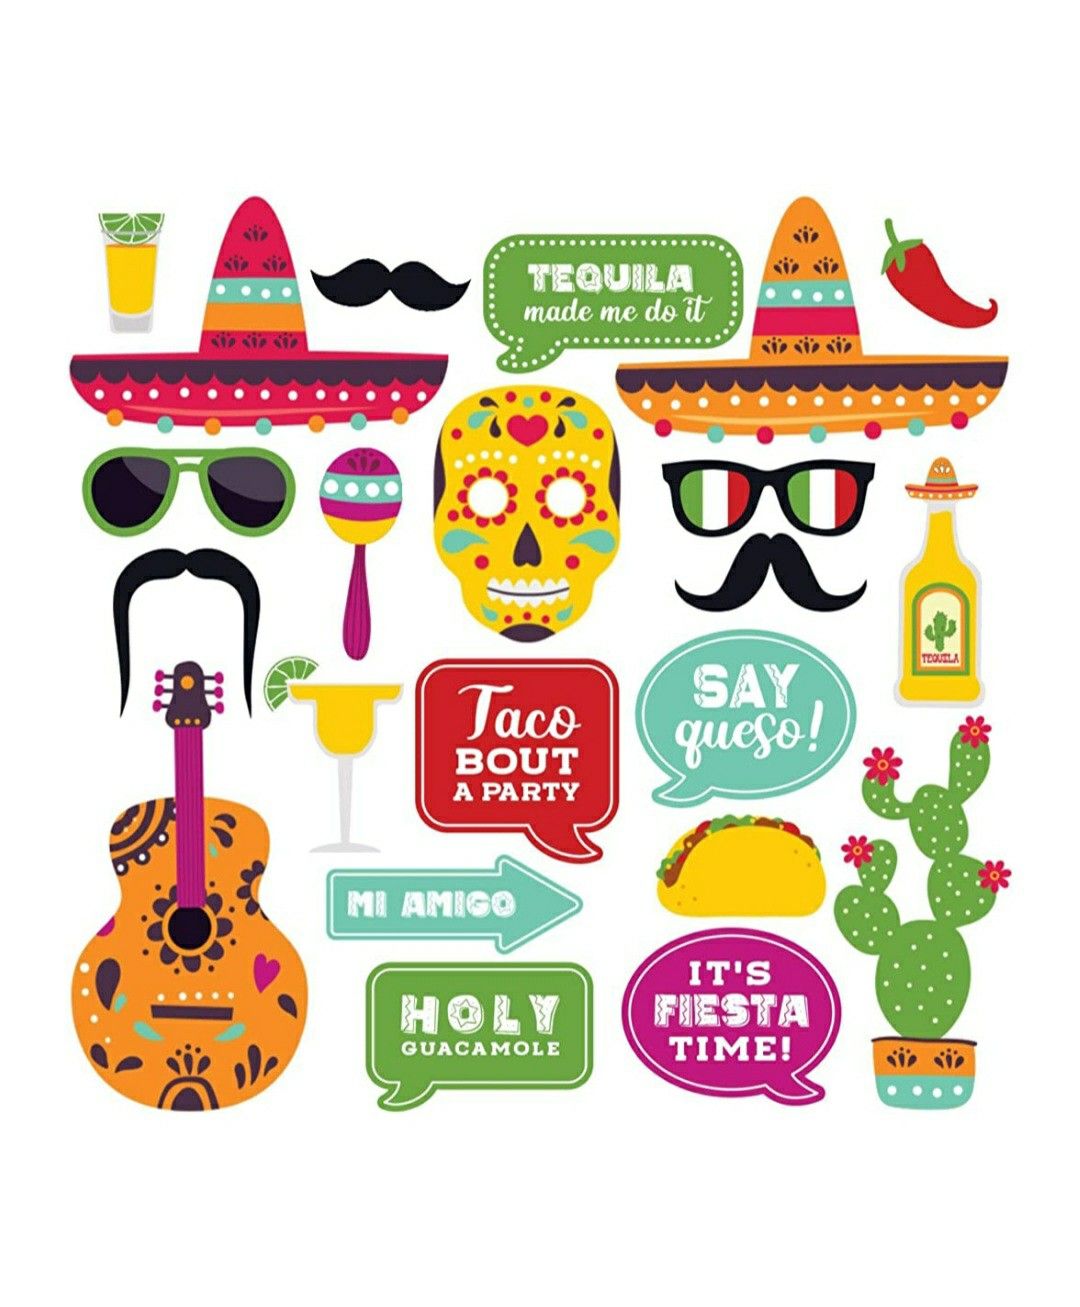 Fully Assembled Fiesta Photo Booth Props. 30 Piece Box Set of Mexican Fiesta, Taco Party Decorations Kit. Colorful Cinco De Mayo Selfie Party Supplies